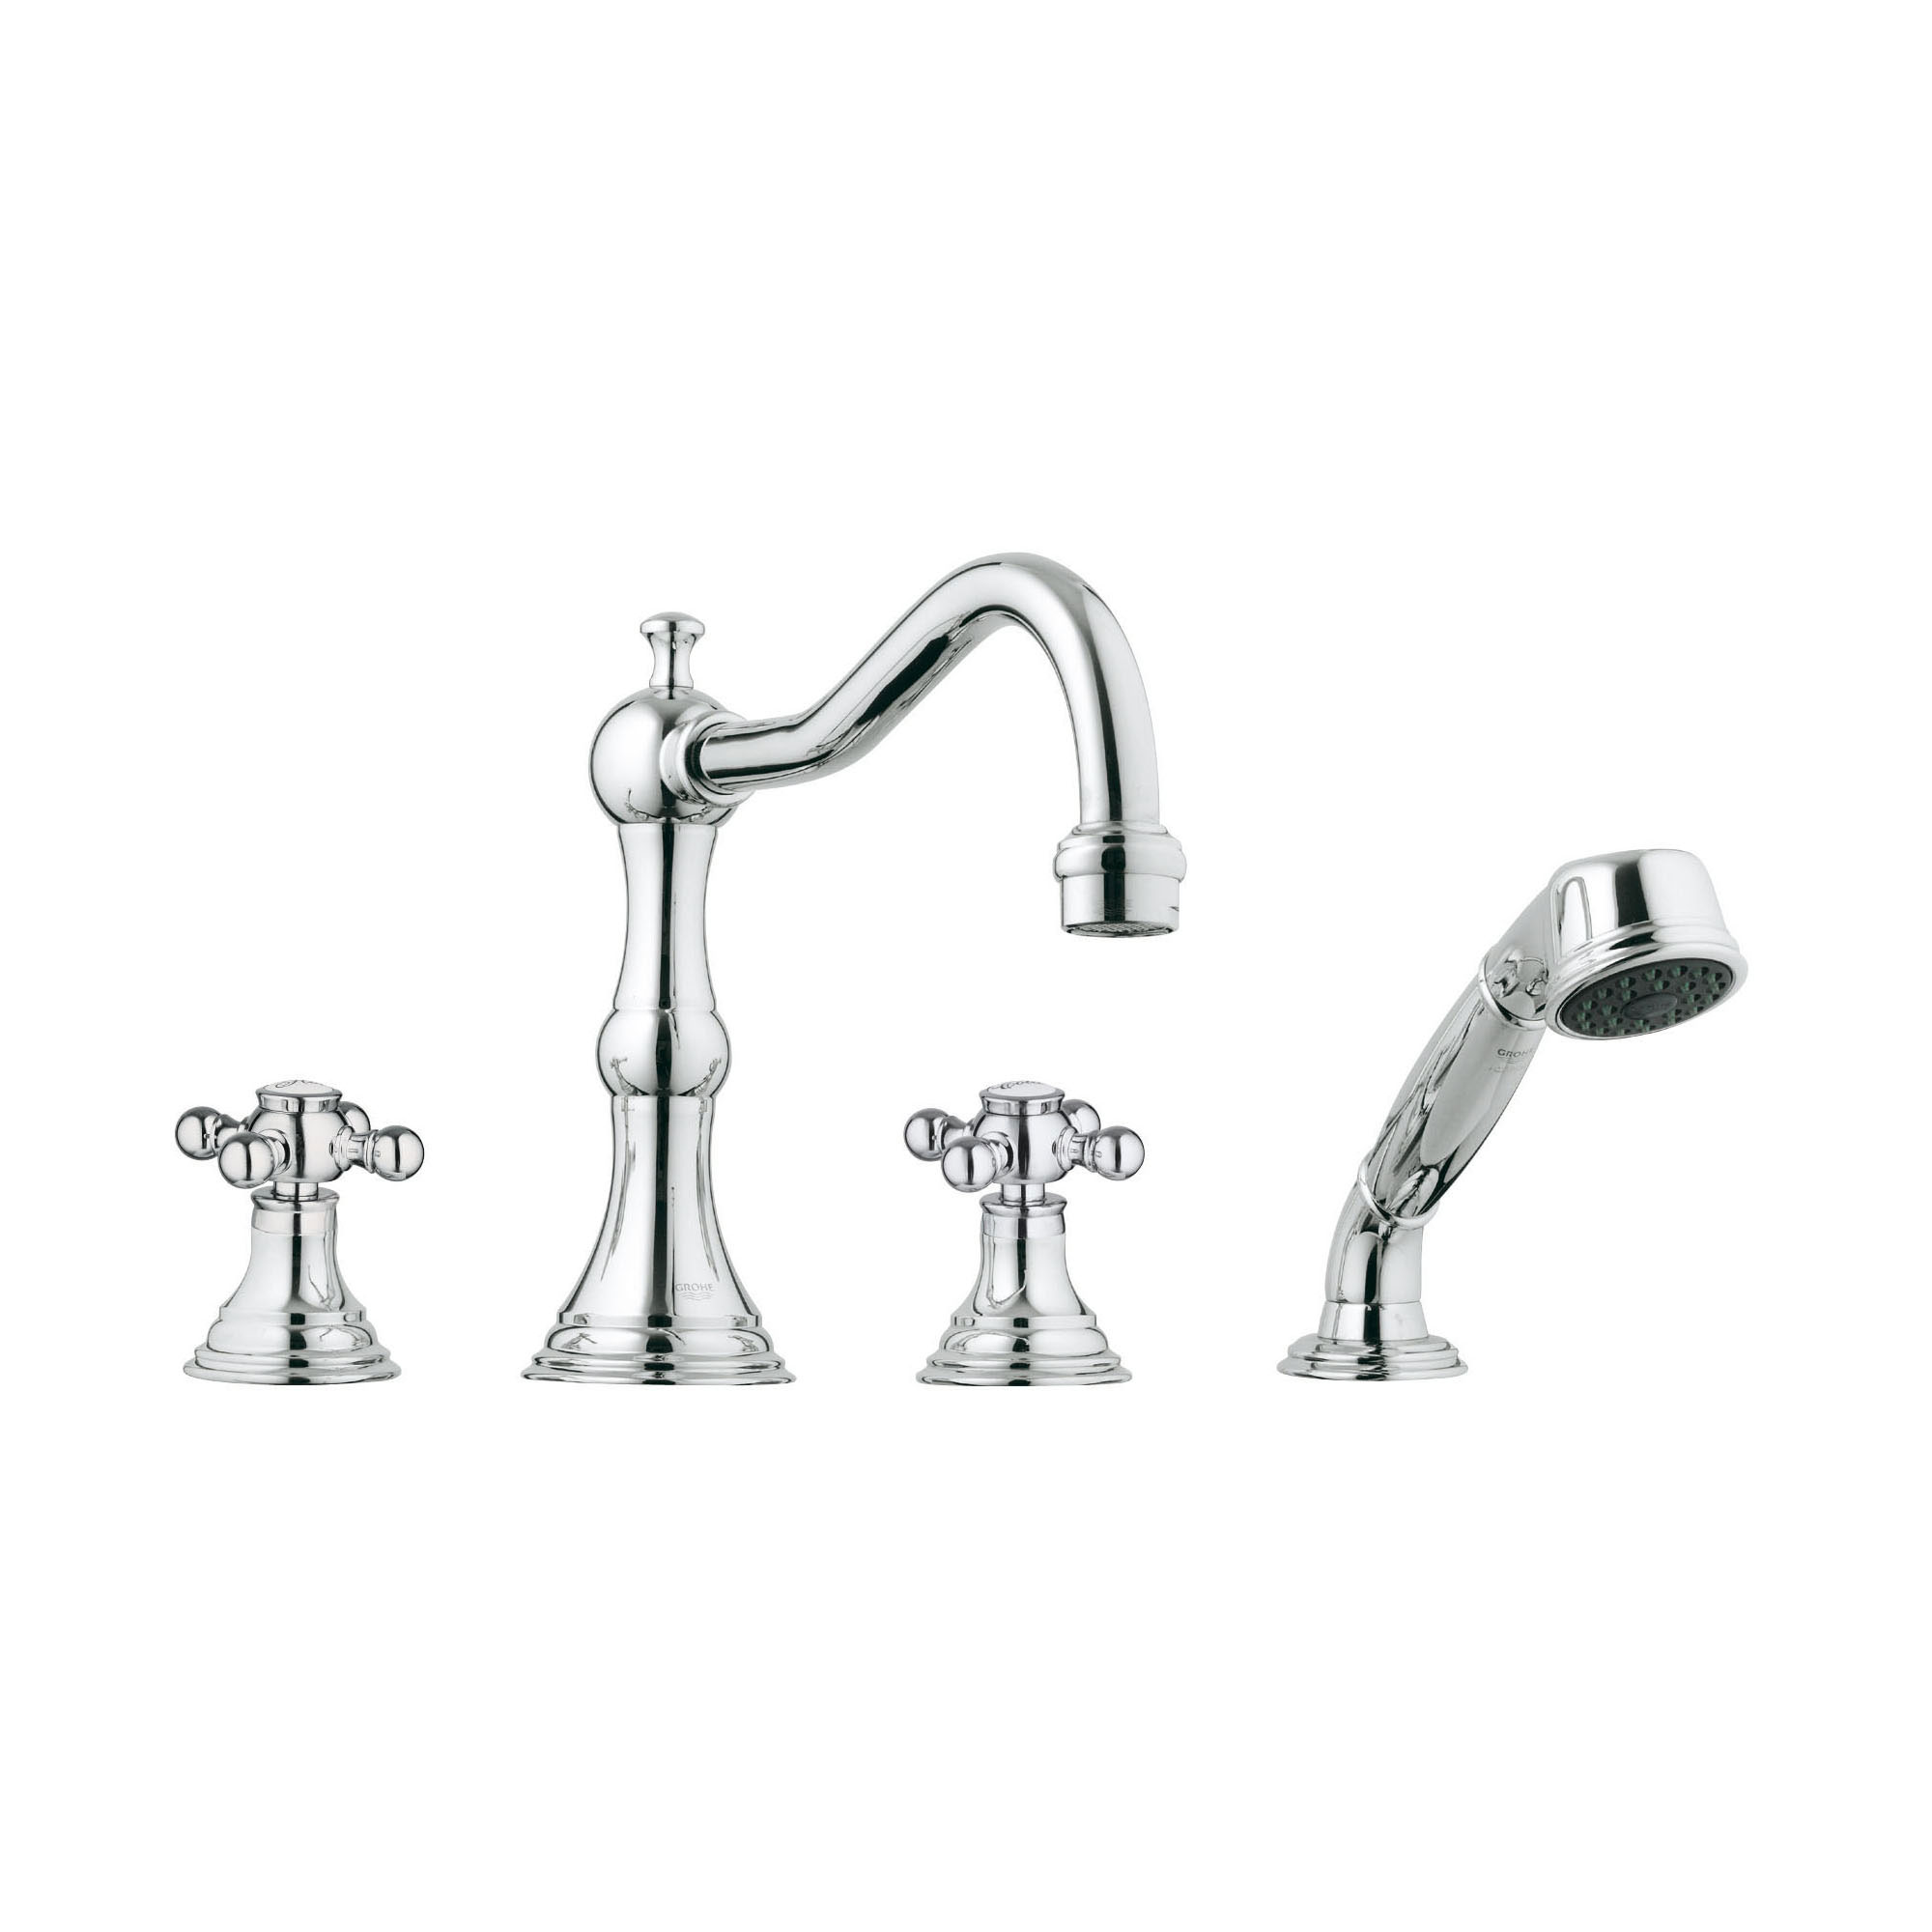 4-Hole 2-Handle Deck Mount Roman Tub Faucet with 9.5 L/min (2.5 gpm) Hand Shower